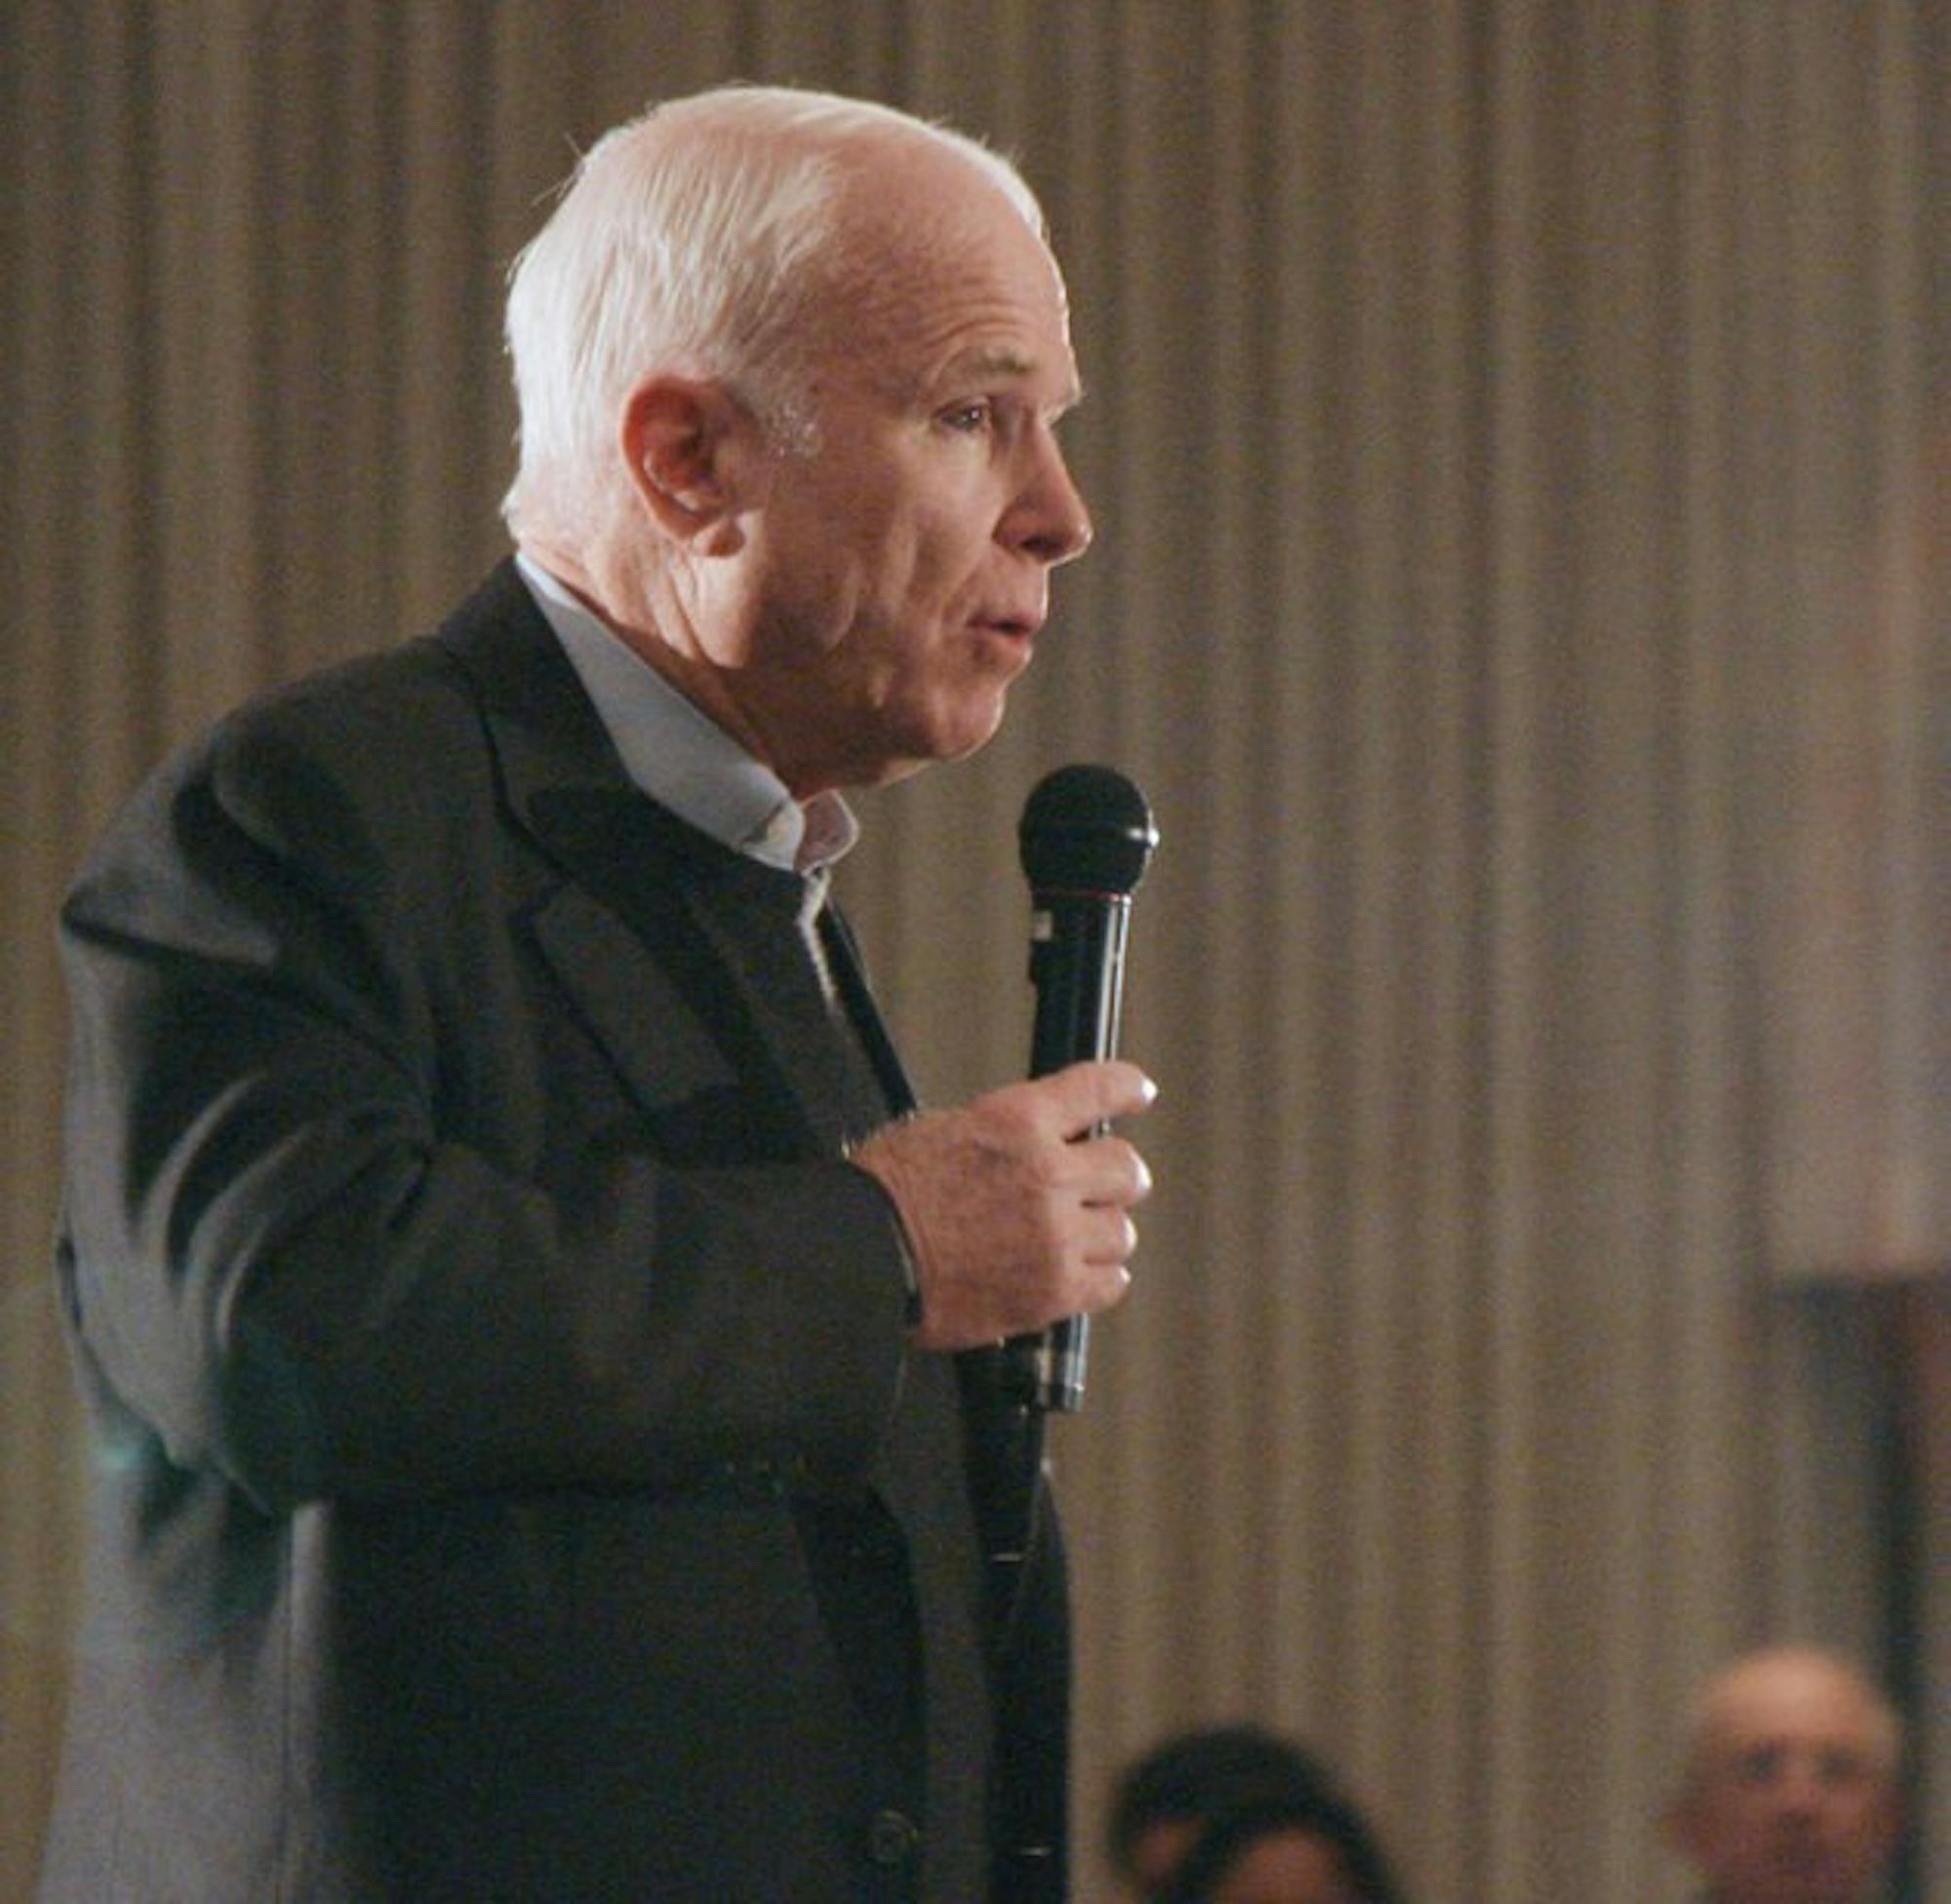 At a Town Hall-style rally, McCain addressed an audience at Alumni Hall on issues including immigration, Iraq and government spending.